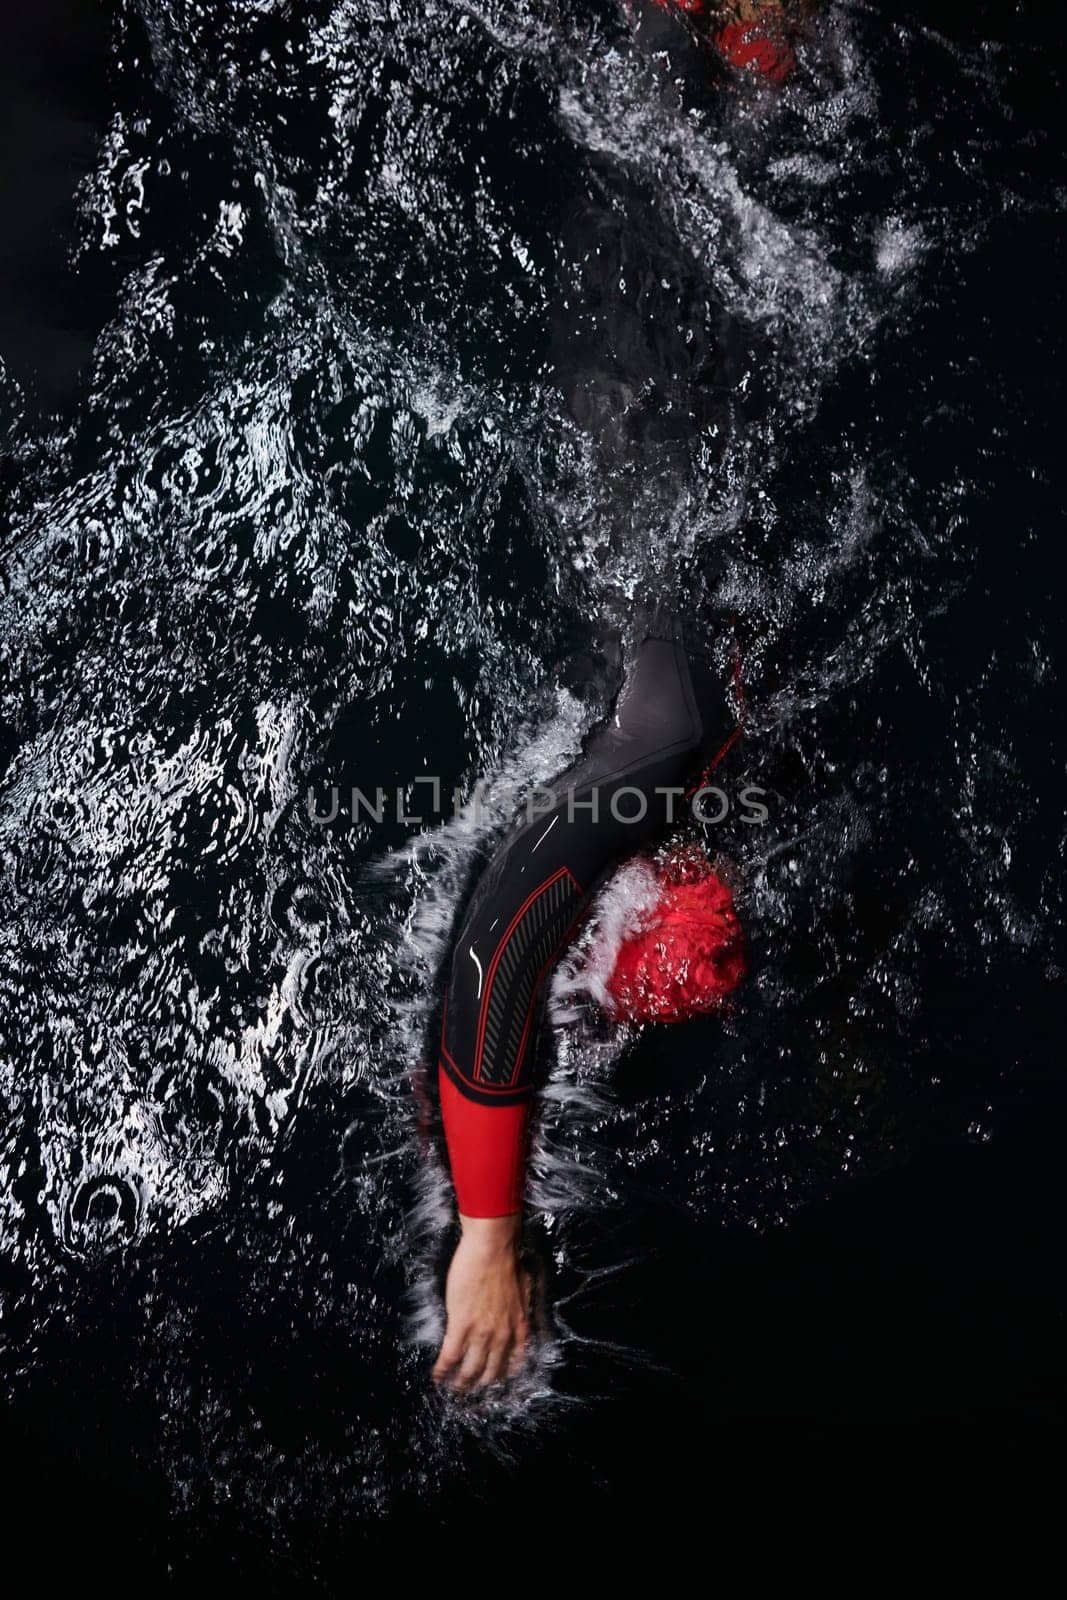 A determined professional triathlete undergoes rigorous night time training in cold waters, showcasing dedication and resilience in preparation for an upcoming triathlon swim competition.